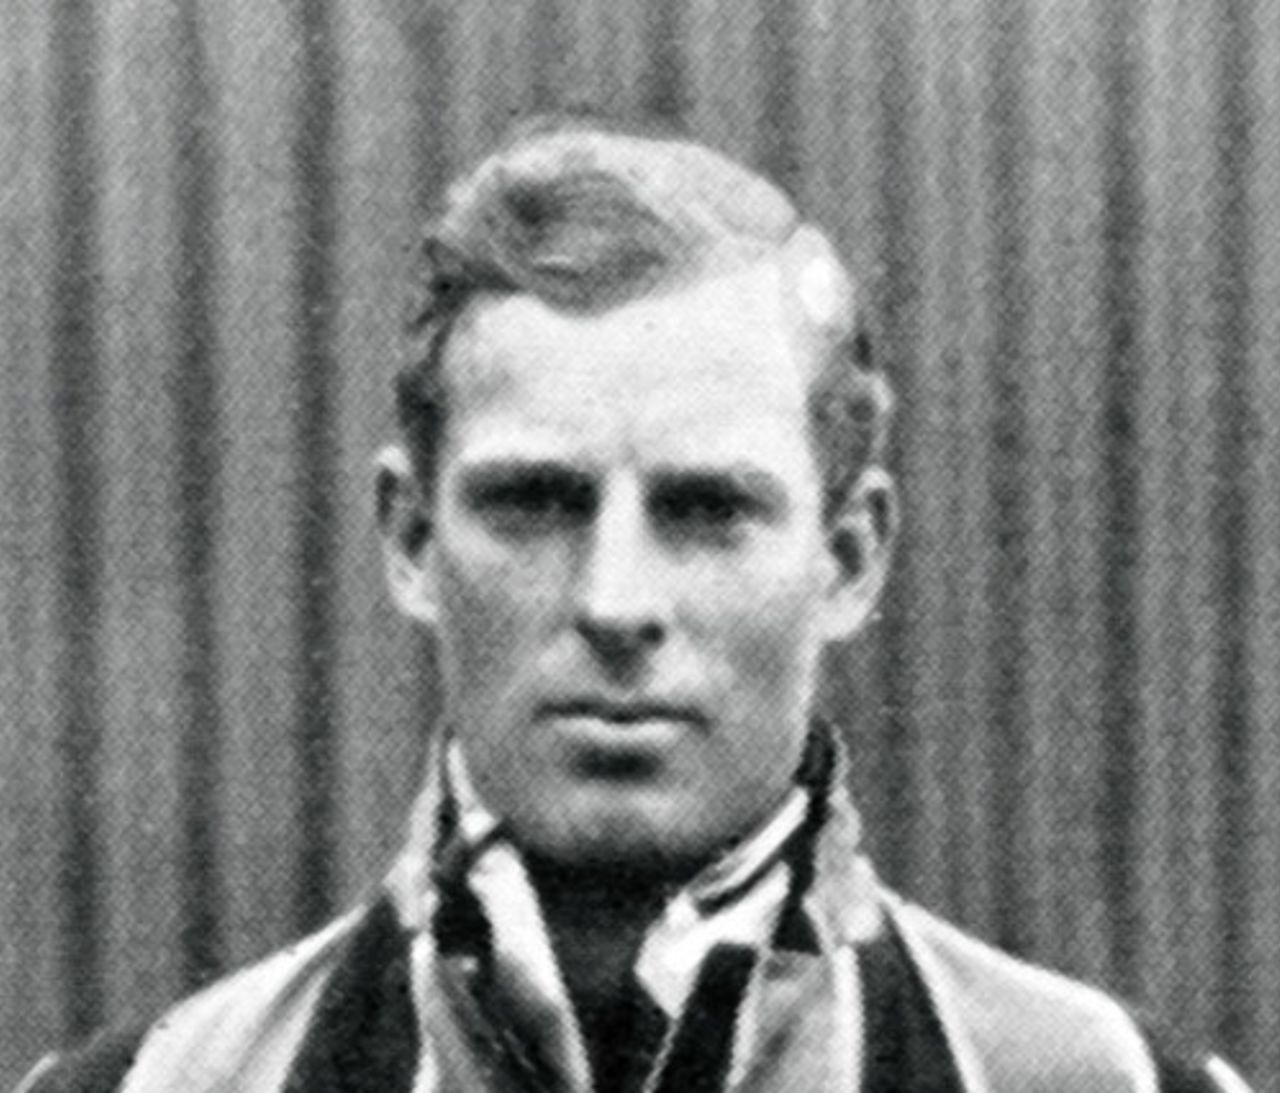 Tony Wilding pictured in 1914